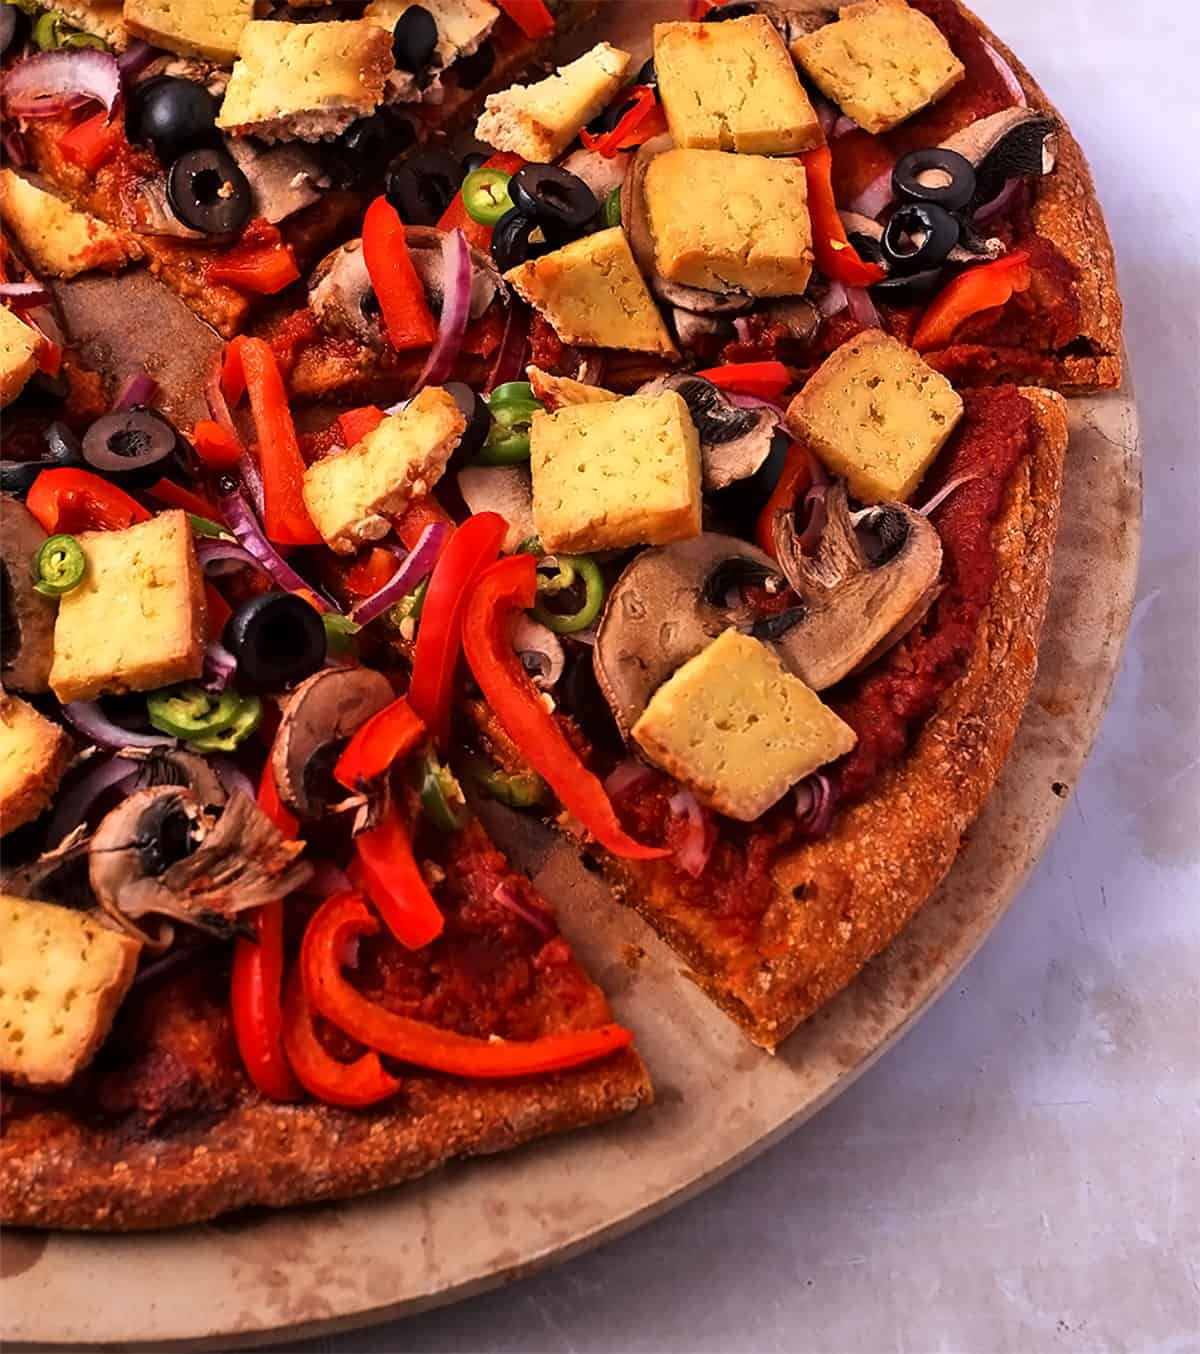 Pizza with sweet potato crust, vegetables, and tofu on a pizza stone.